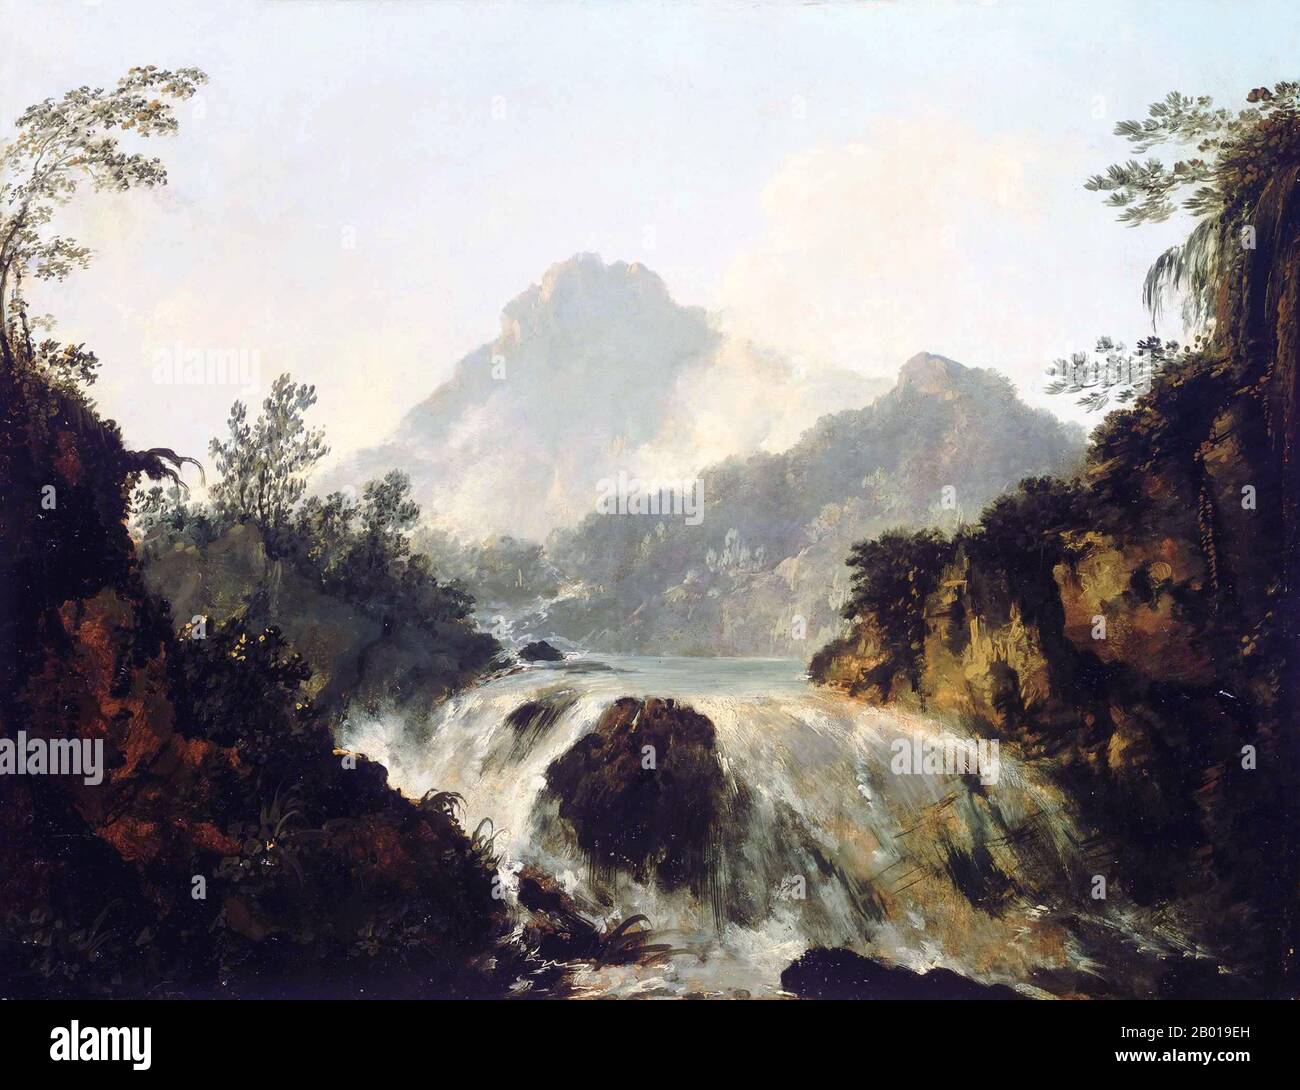 Tahiti: 'A Cascade in the Tuauru Valley, Tahiti'. Oil on wood panel painting by William Hodges (28 October 1744 - 6 March 1797), 1773.  William Hodges was an English painter. He was a member of James Cook's second voyage to the Pacific Ocean, and is best known for the sketches and paintings of locations he visited on that voyage, including Table Bay, Tahiti, Easter Island, and the Antarctic. Hodges accompanied Cook to the Pacific as the expedition's artist in 1772-1775. Many of his sketches and wash paintings were adapted as engravings in the original published edition of Cook's journals. Stock Photo